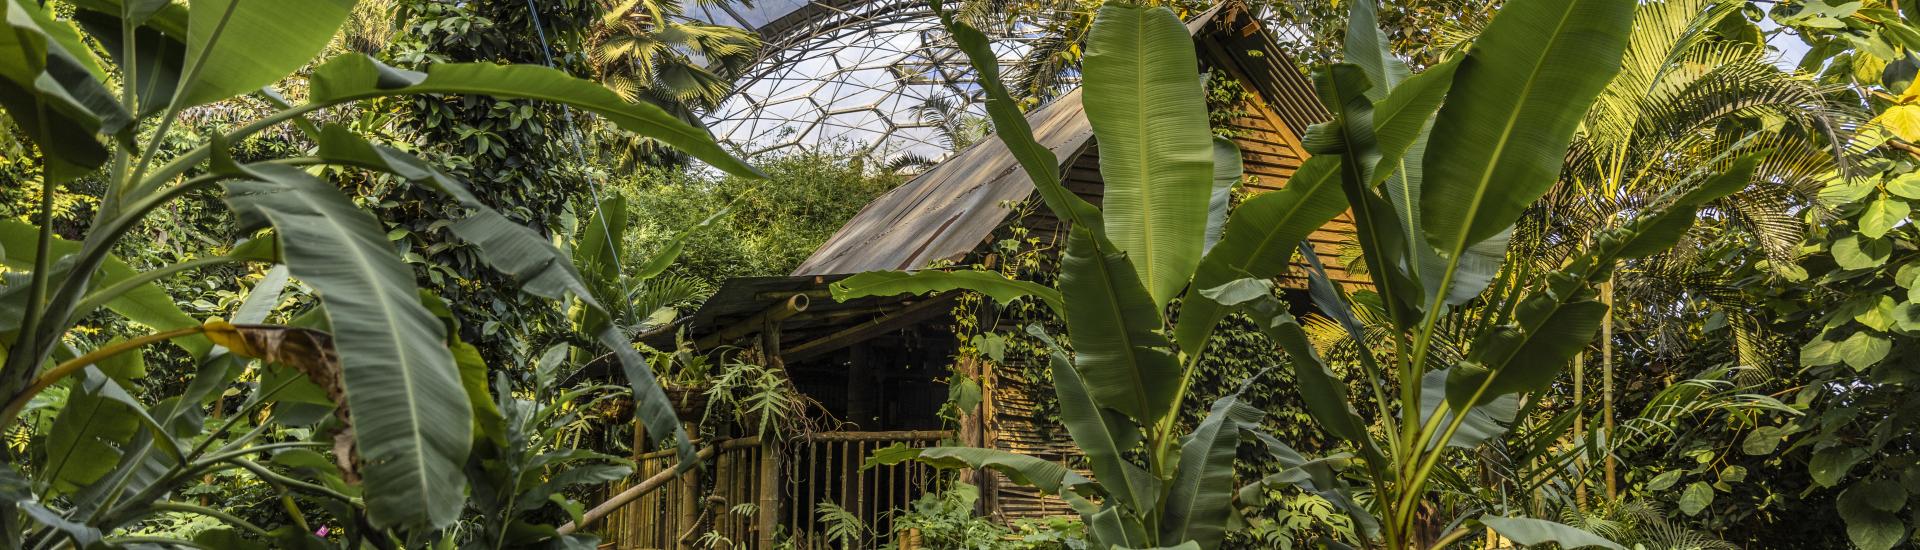 Malaysian house in the Eden Project Rainforest Biome